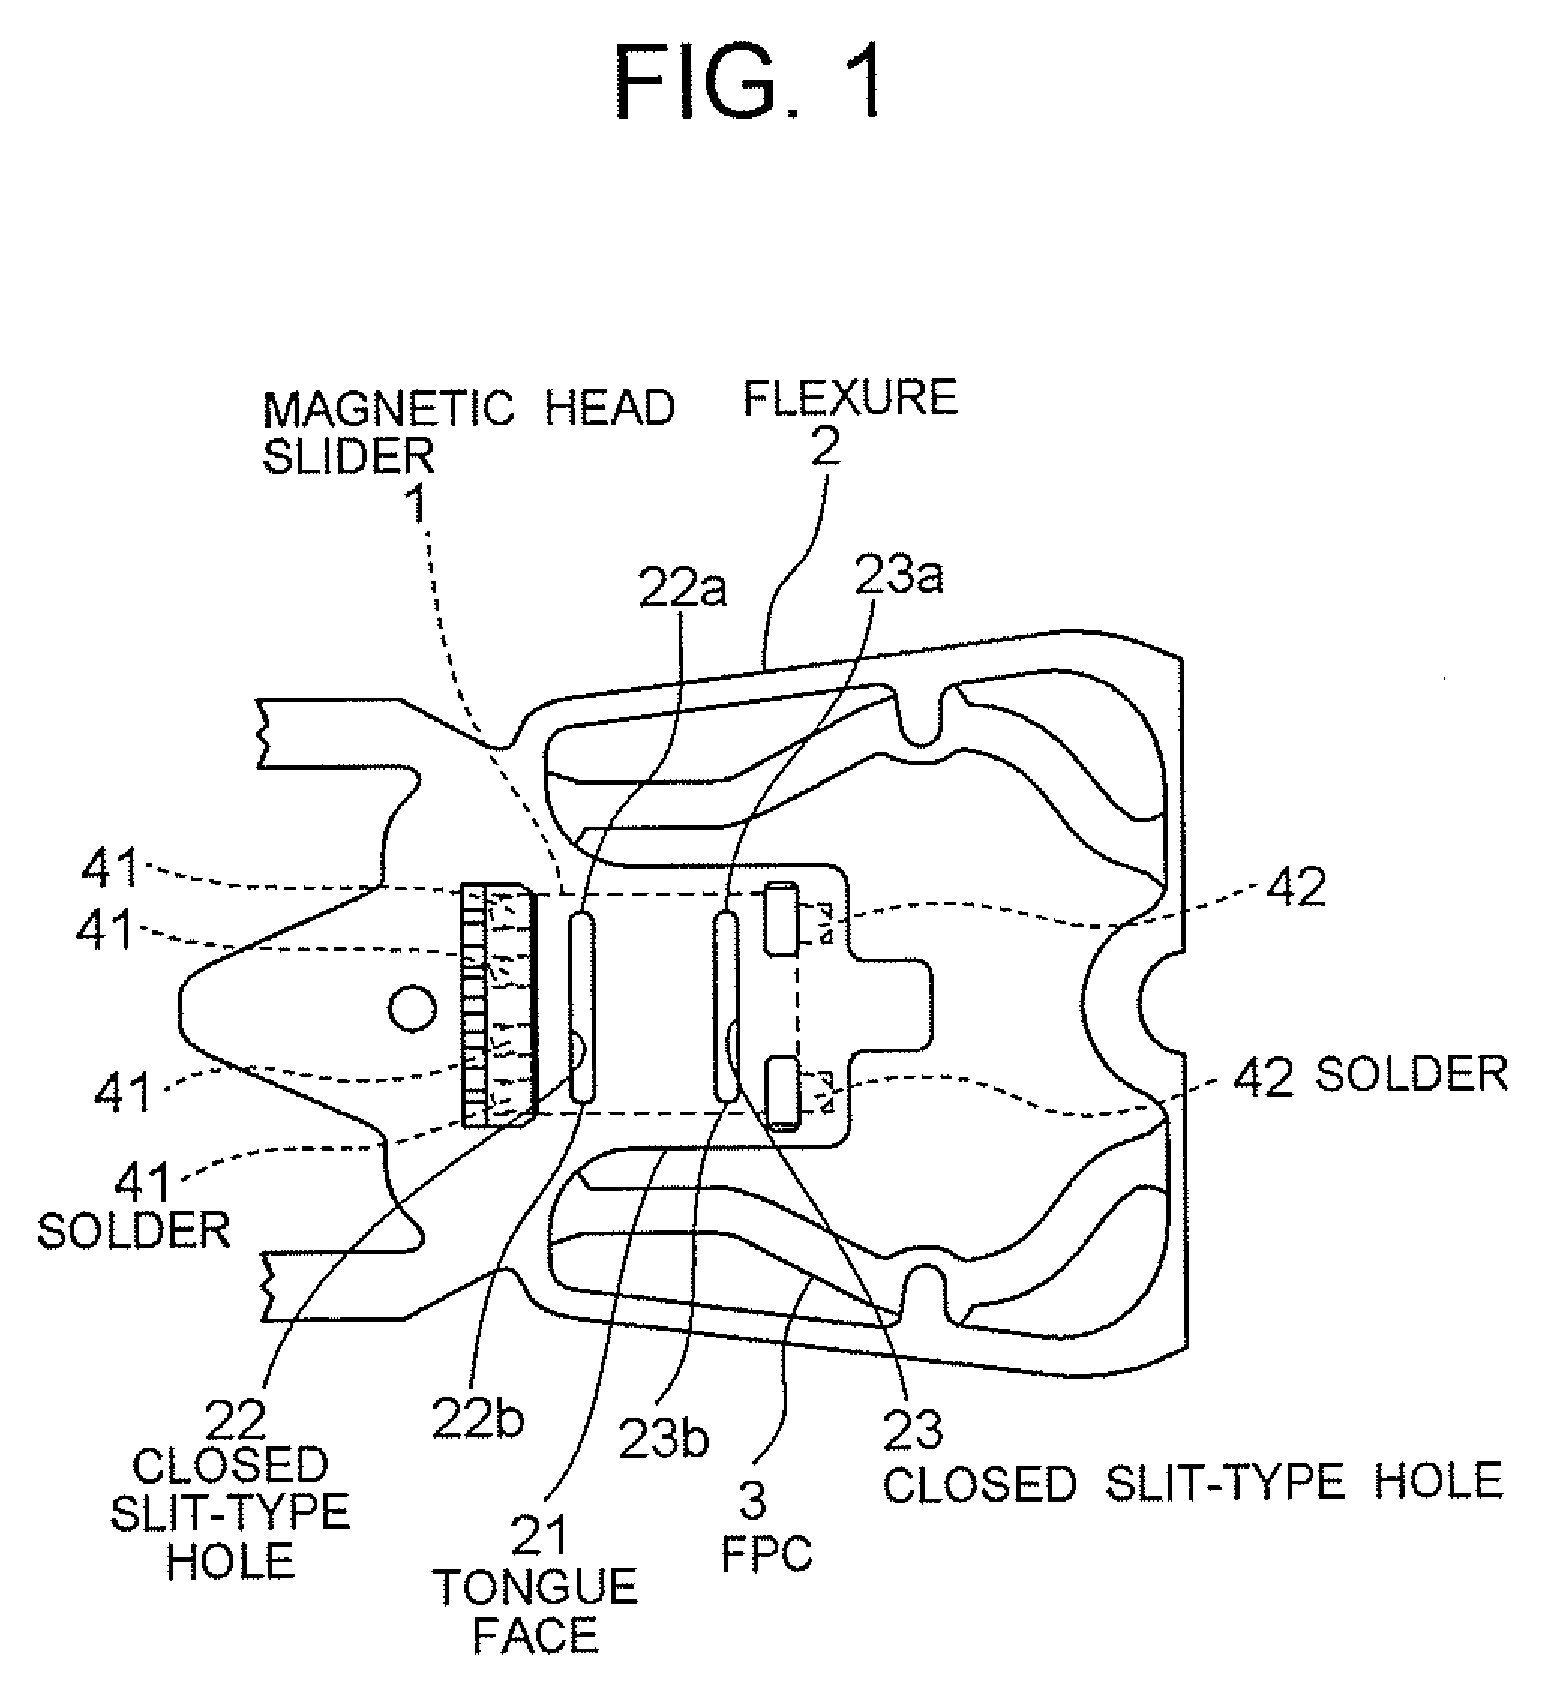 Suspension for mounting magnetic head slider, head gimbal assembly and hard disk drive